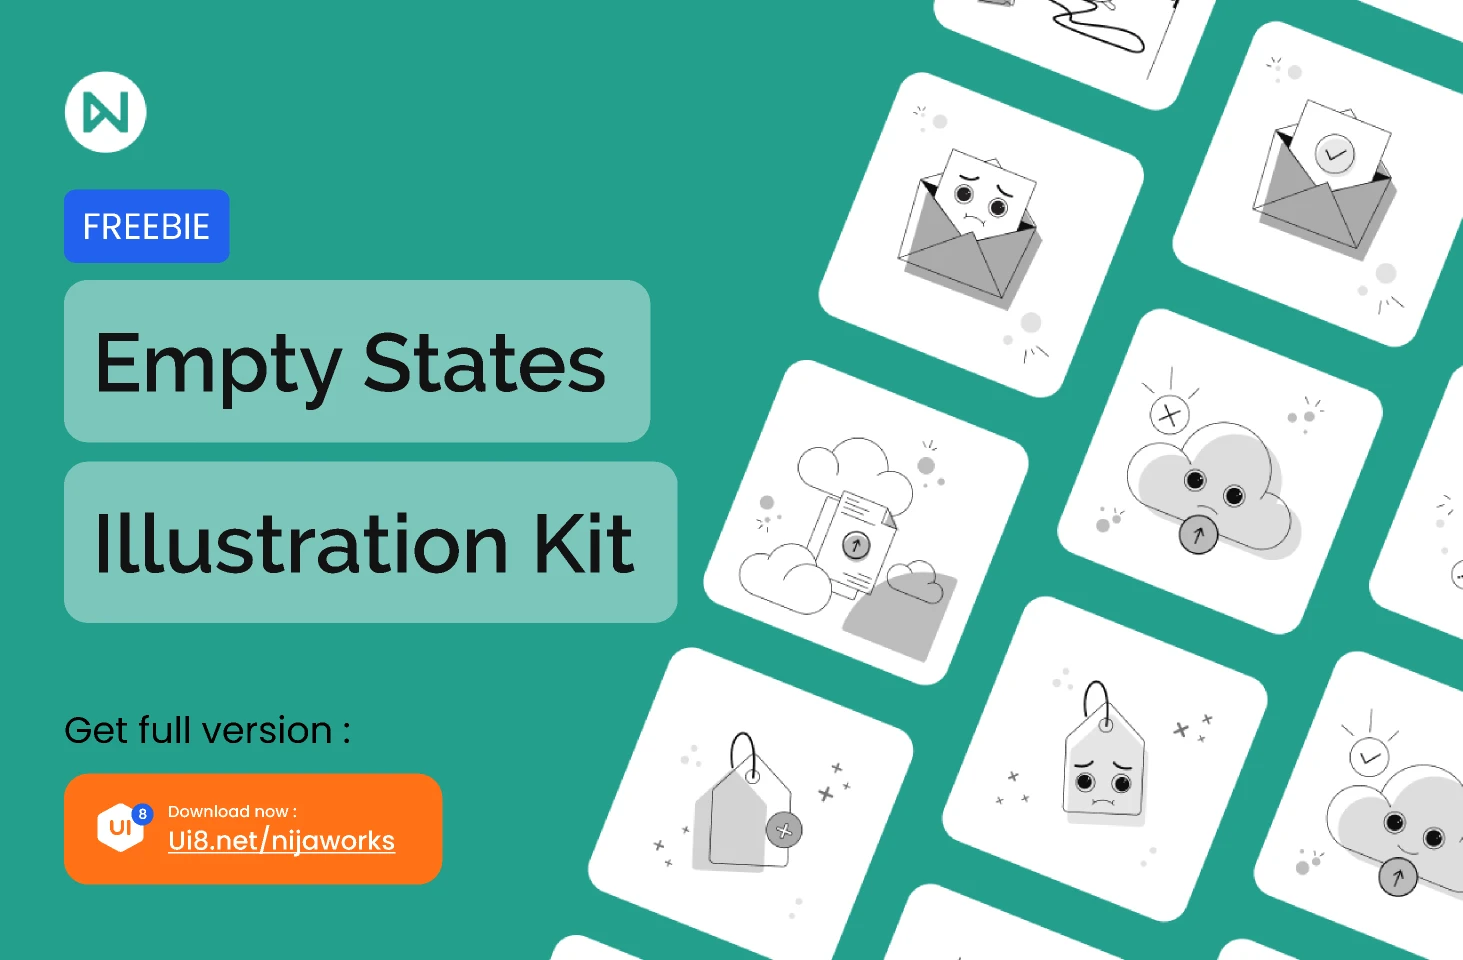 Empty State Illustration Kit for Figma and Adobe XD